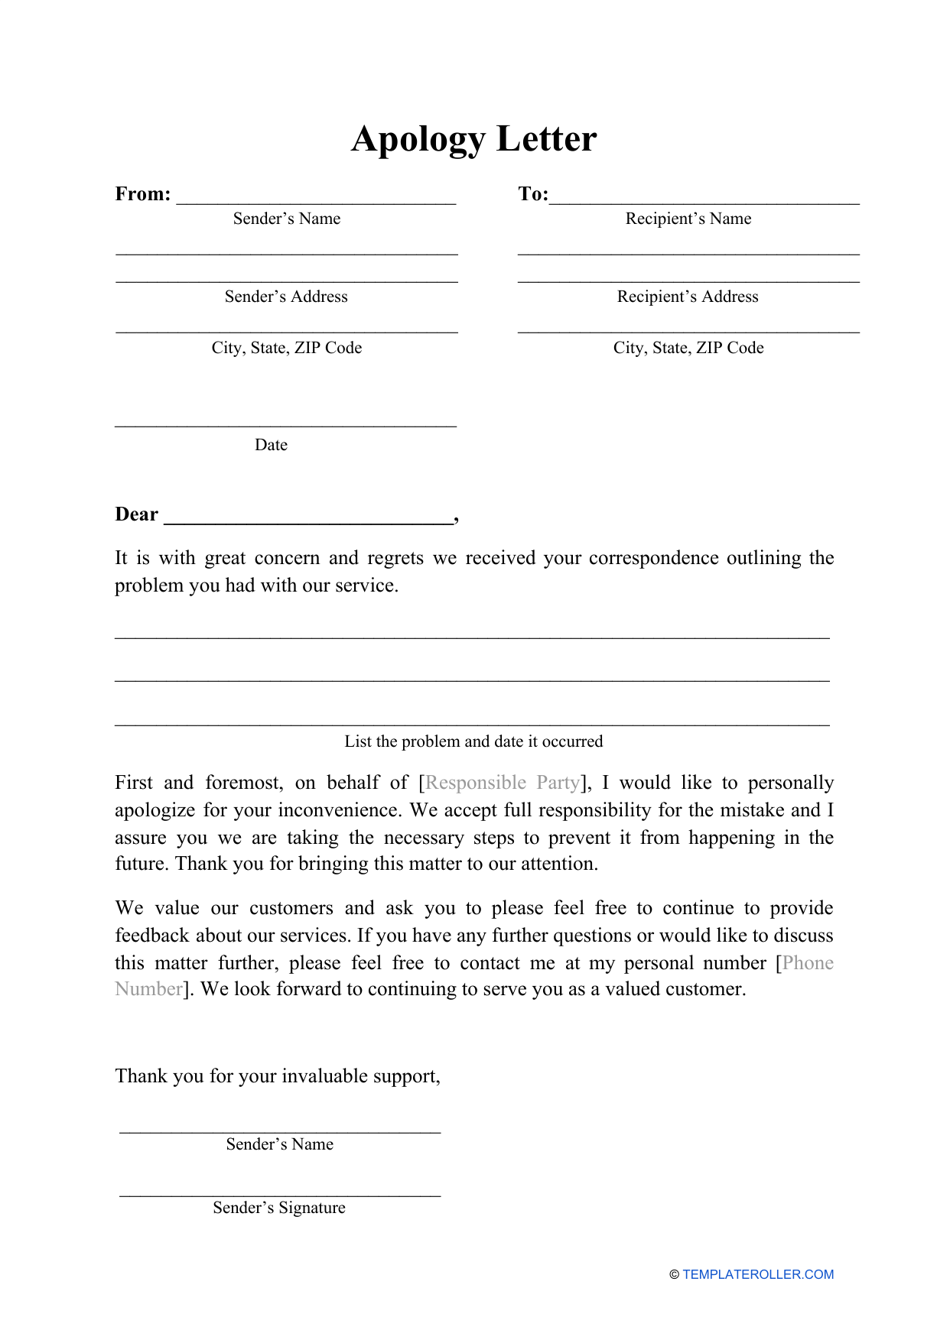 apology-letter-template-download-printable-pdf-templateroller